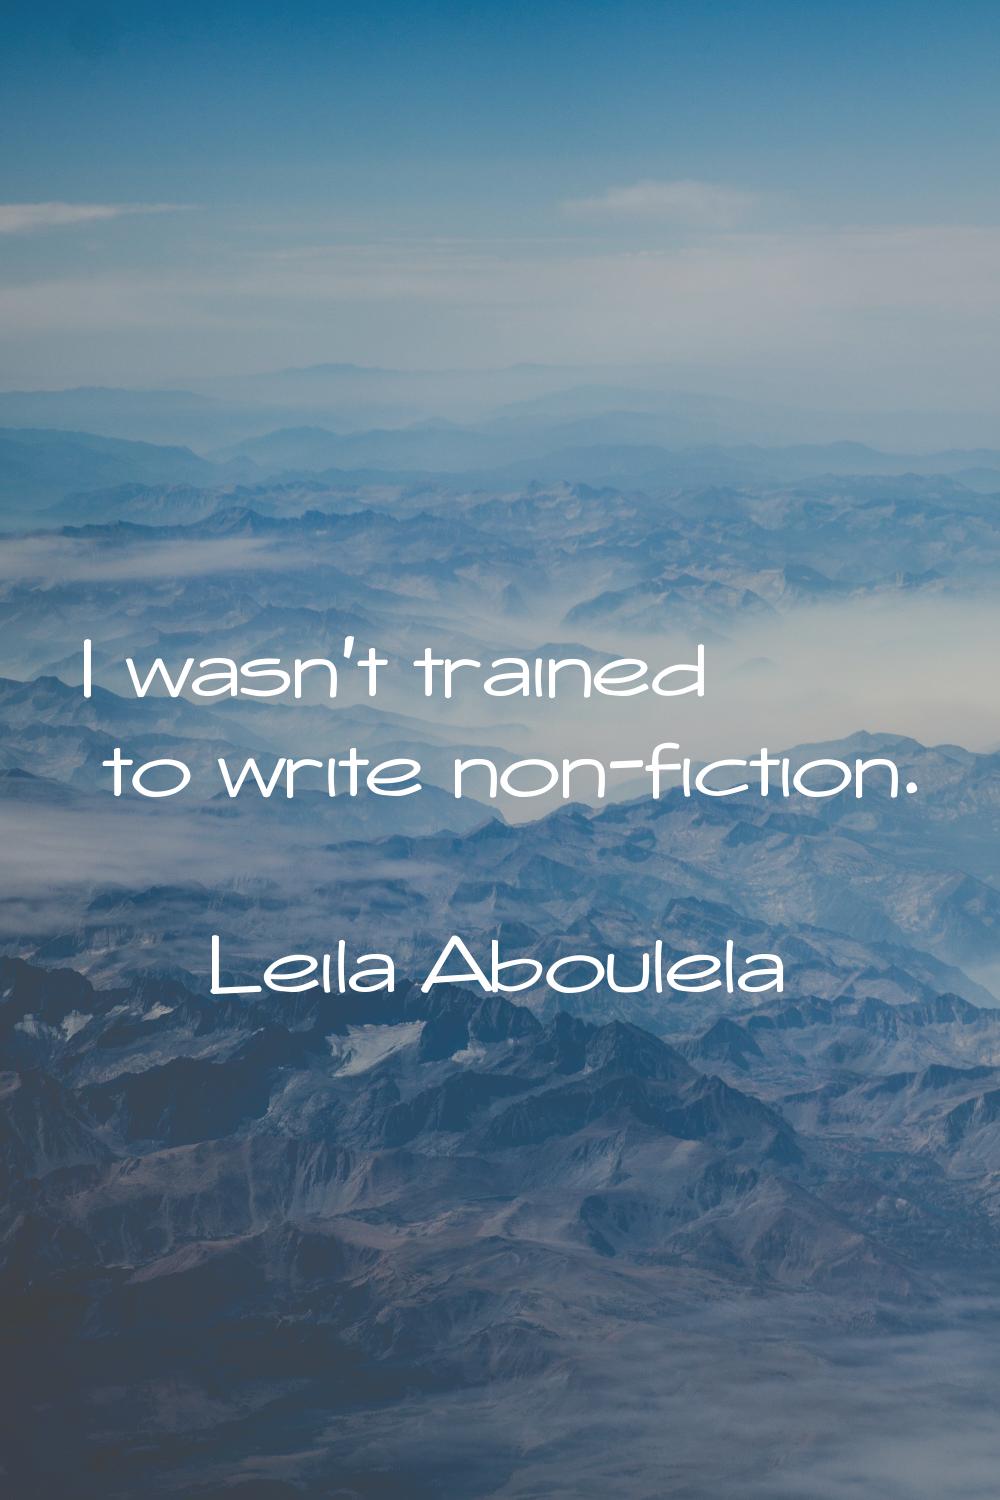 I wasn't trained to write non-fiction.